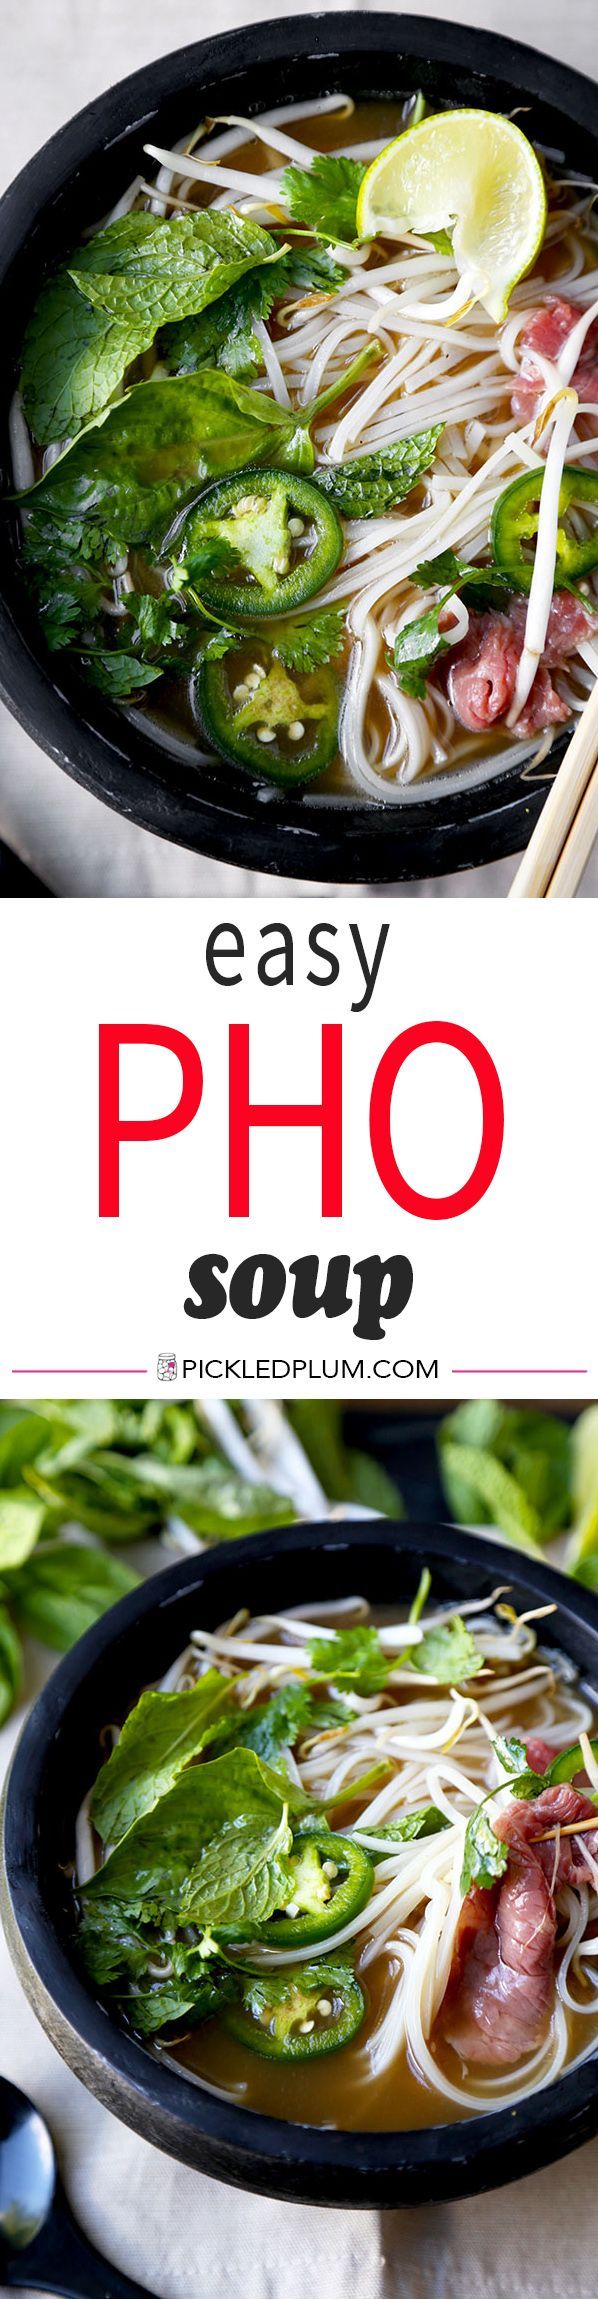 Easy Pho Soup Recipe – Slurp your noodles with abandon in 30 minutes with this Easy Pho Soup Recipe! A quick, satisfying and